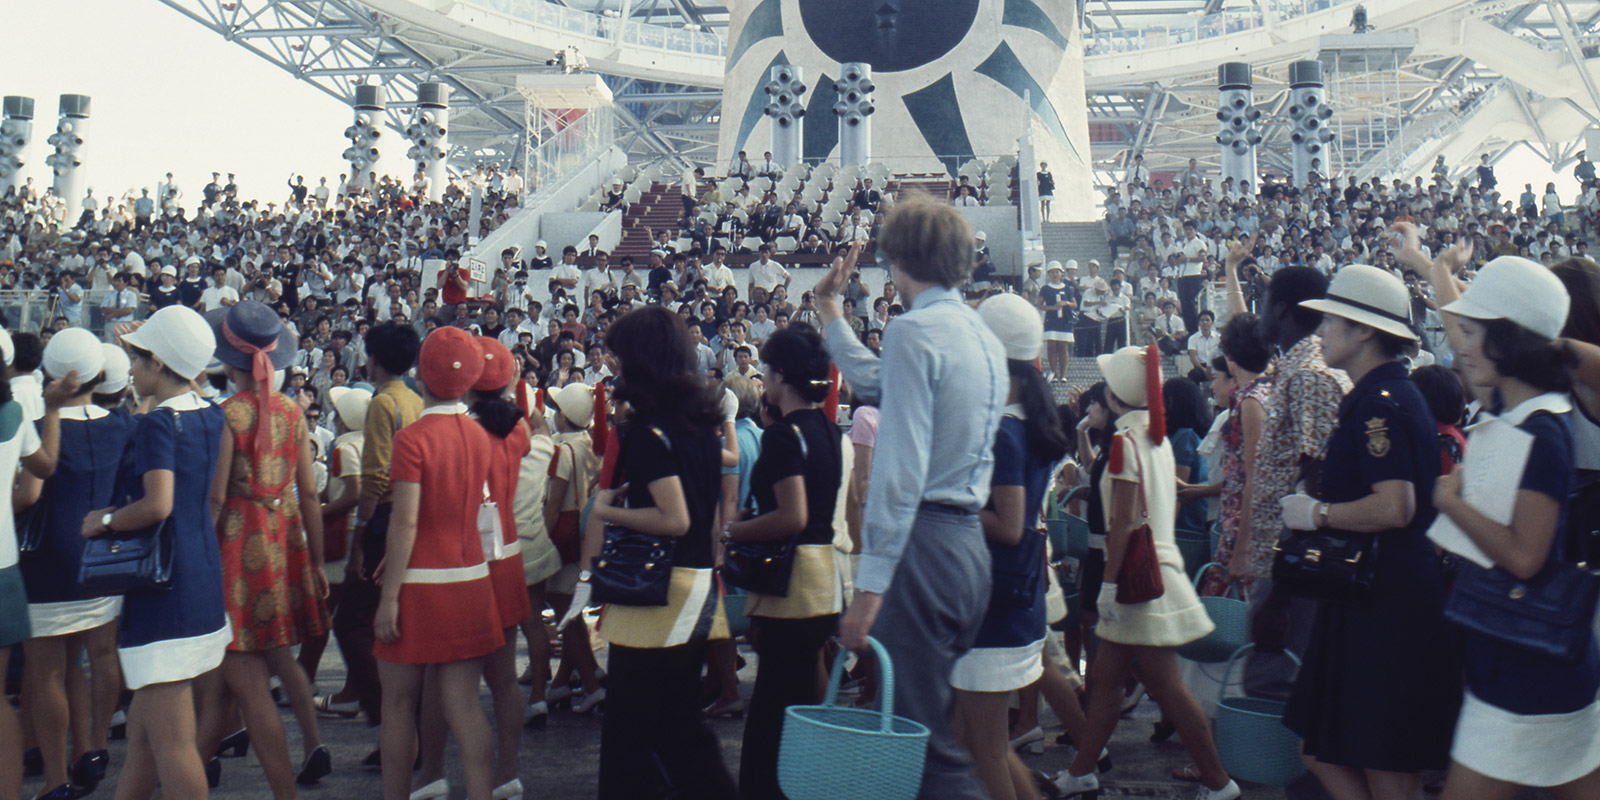 Crowds at Expo ’70 | image courtesy: Osaka Prefectural Government